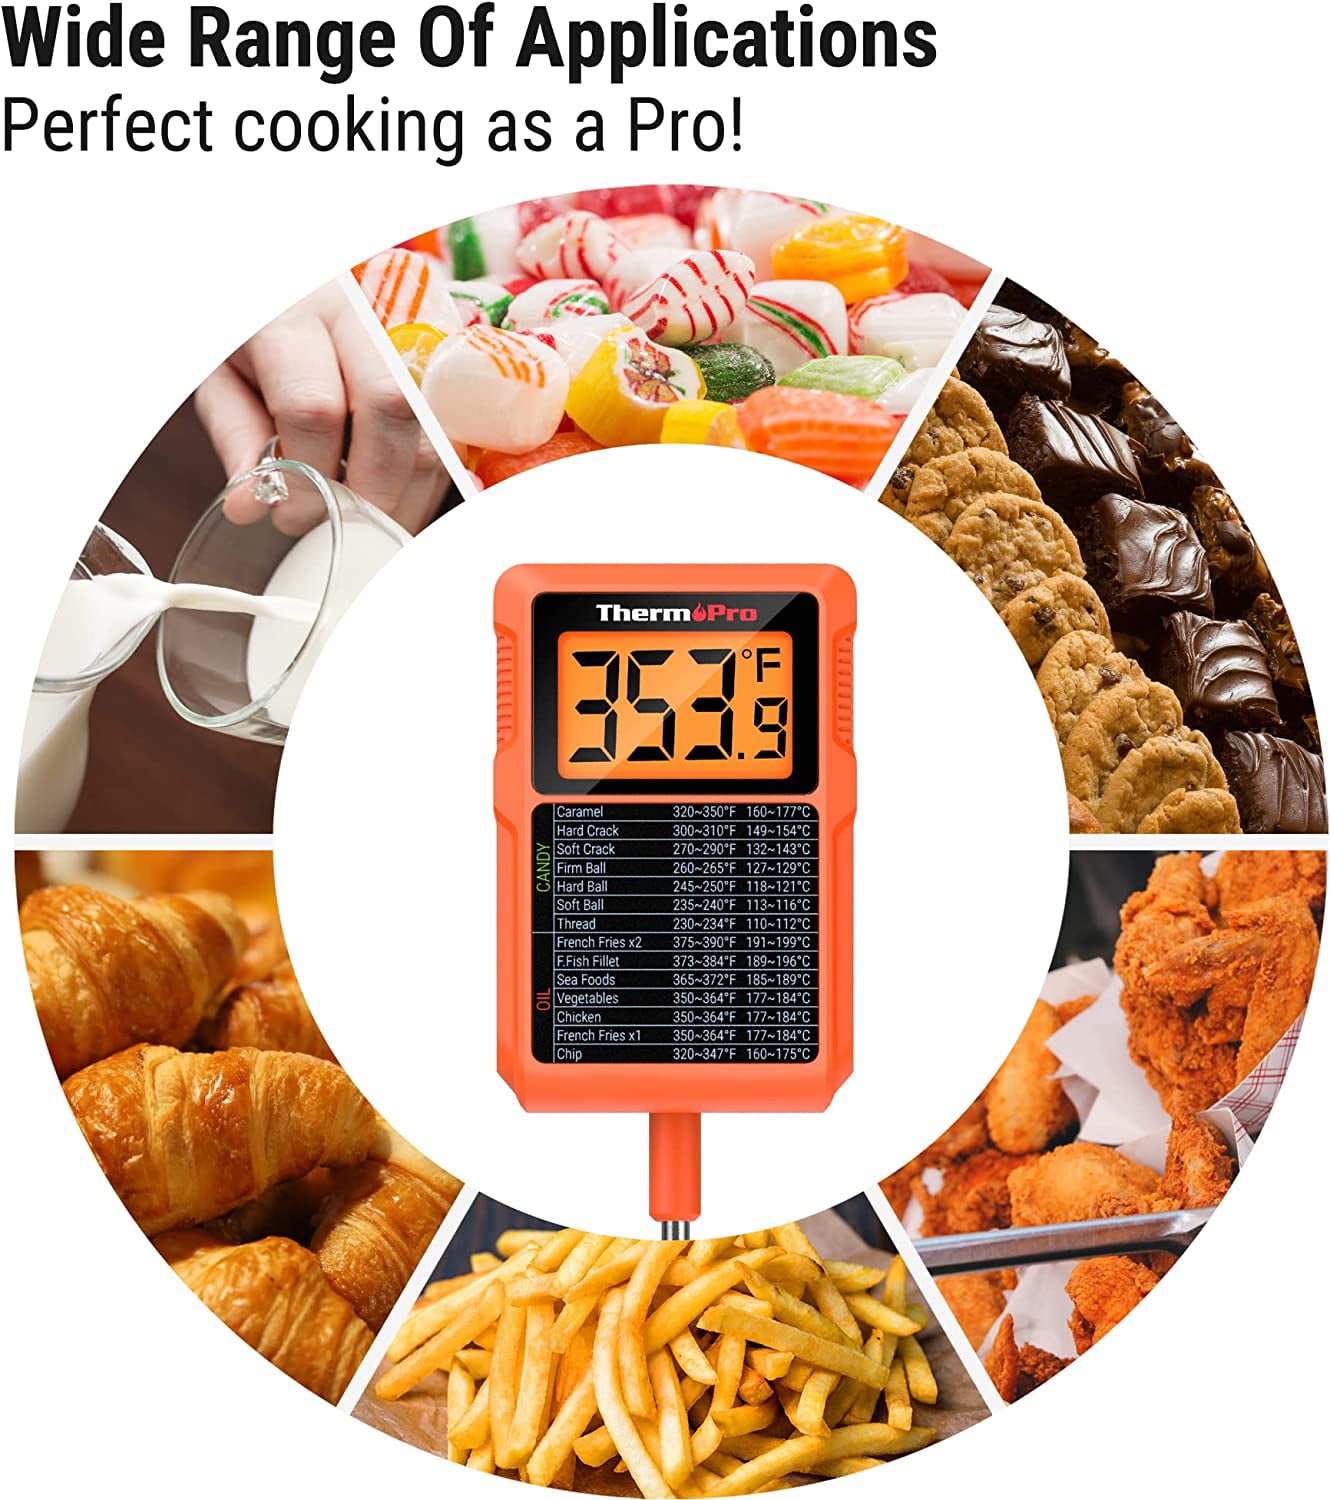 ThermoPro Waterproof Digital Candy Thermometer with Pot Clip, 8